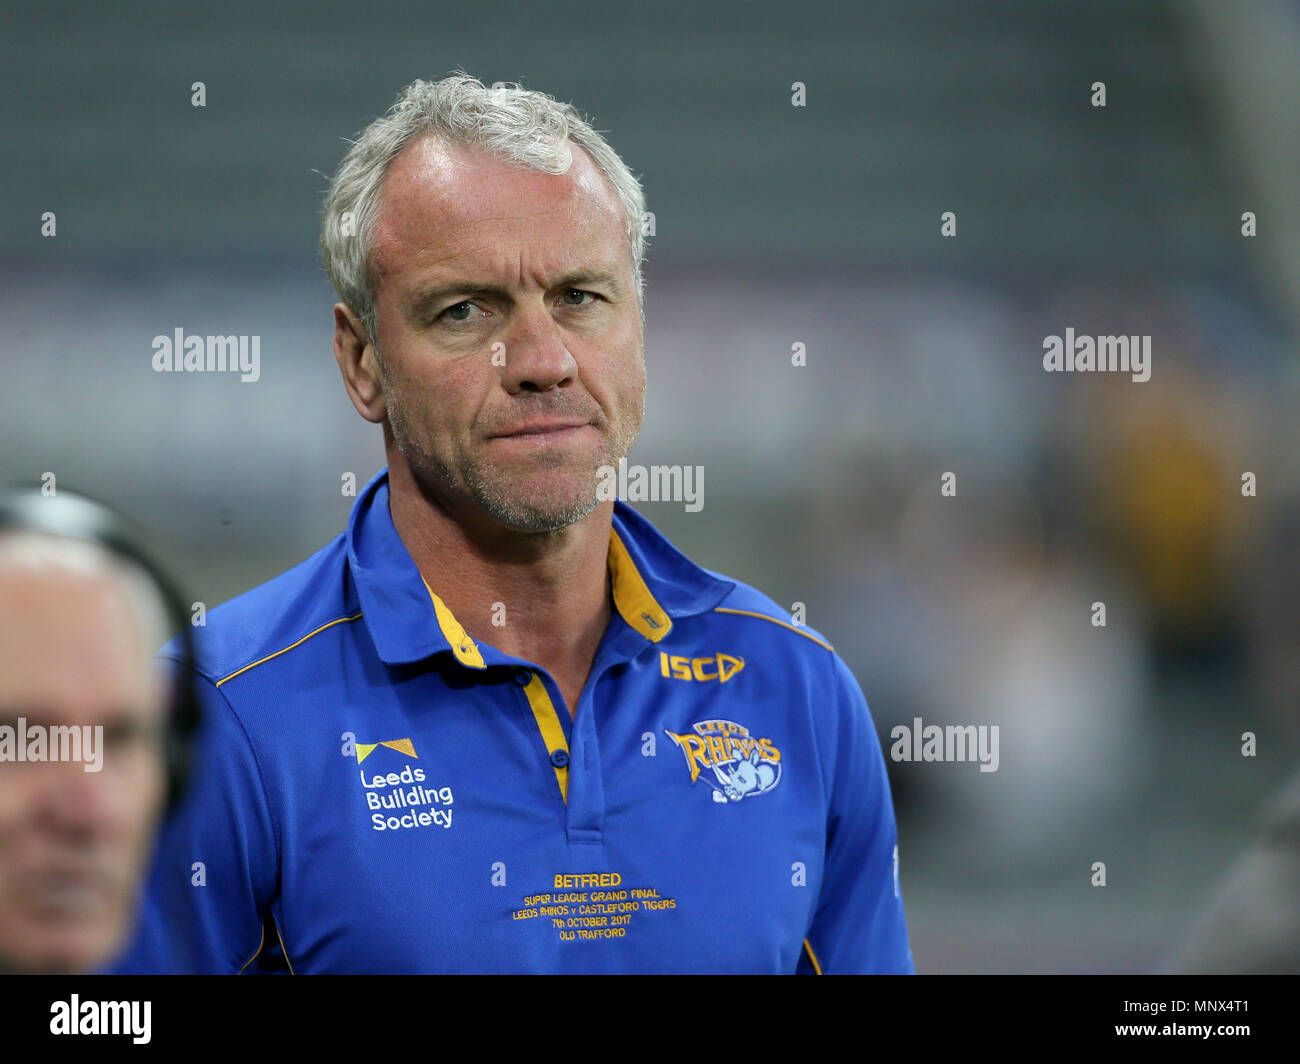 Leeds Rhino's head Coach Brian McDermott after the Betfred Super League, Magic Weekend match at St James' Park, Newcastle. PRESS ASSOCIATION Photo. Picture date: Saturday May 19, 2018. See PA story RUGBYL Castleford. Photo credit should read: Richard Sellers/PA Wire. Stock Photo